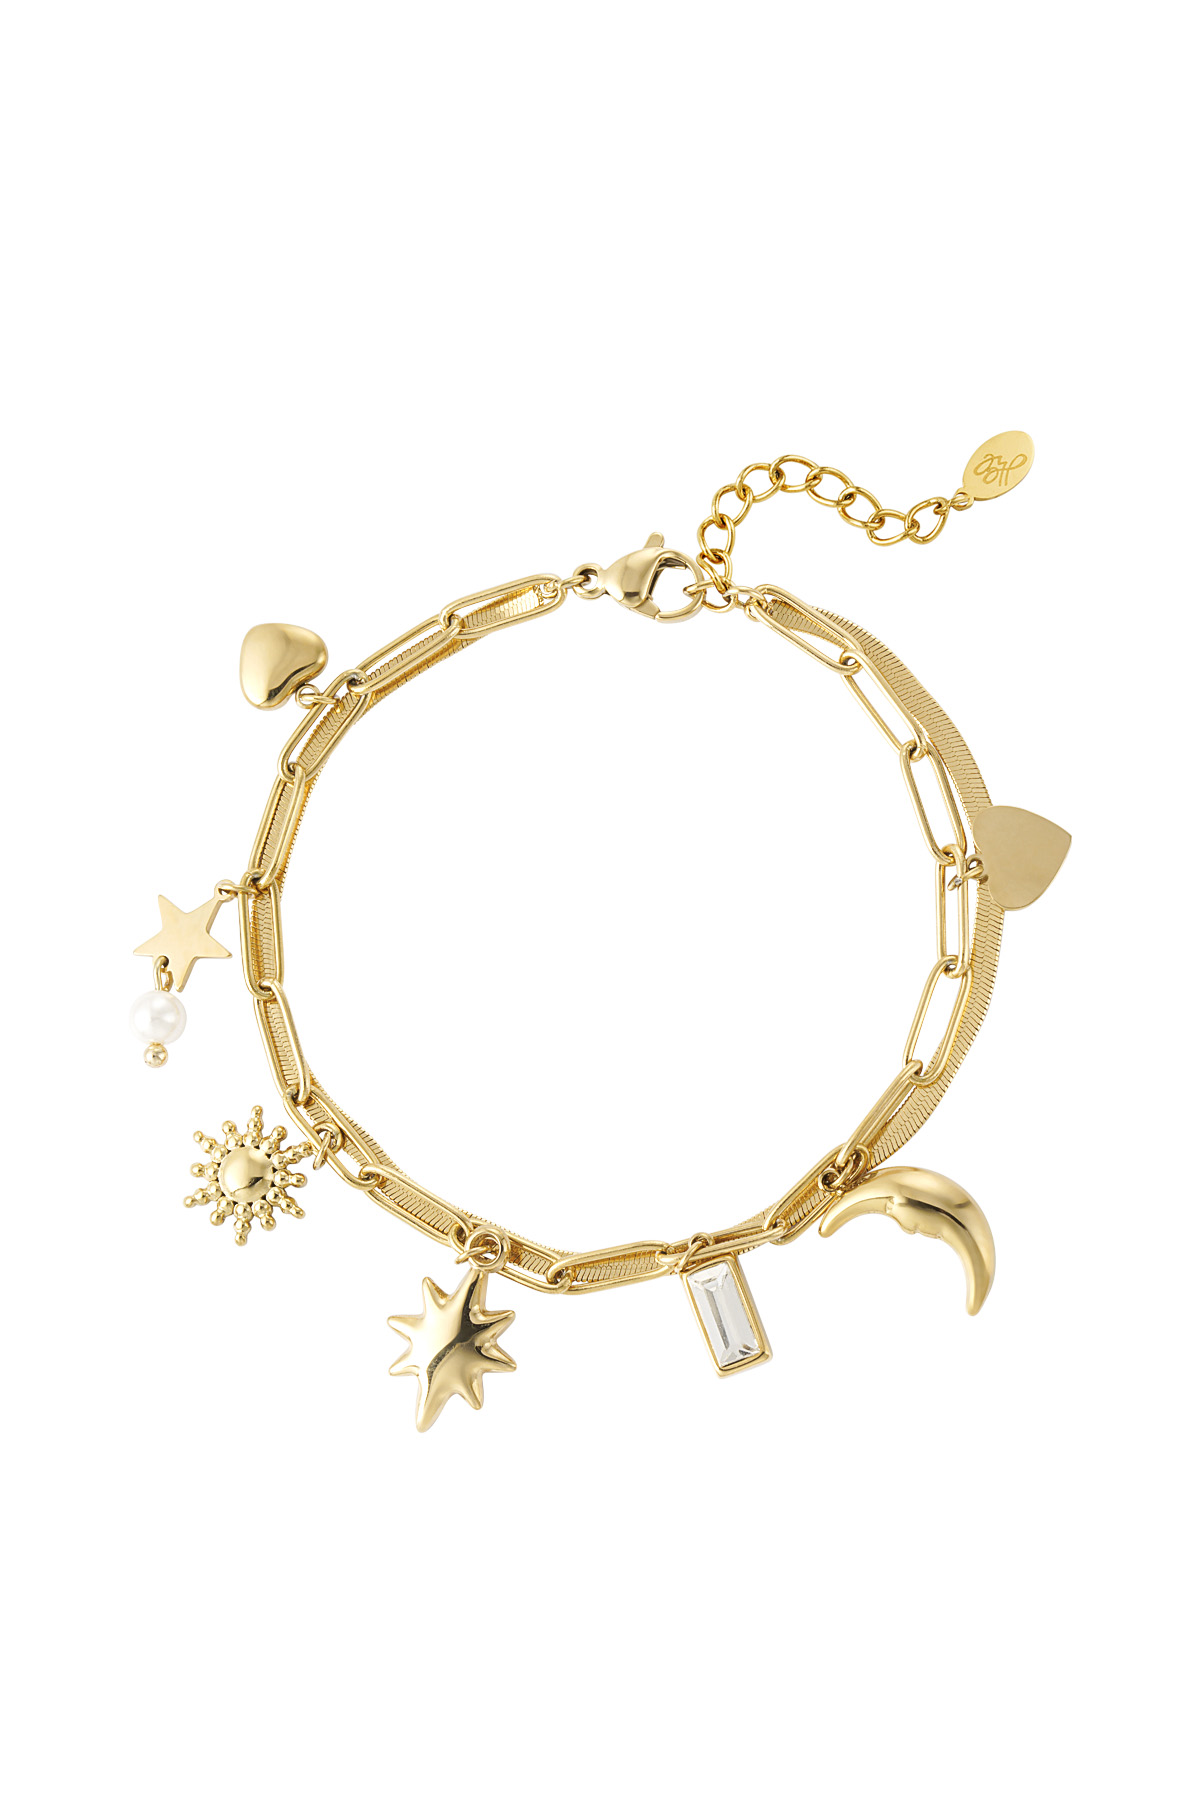 Day and night charm bracelet - gold h5 